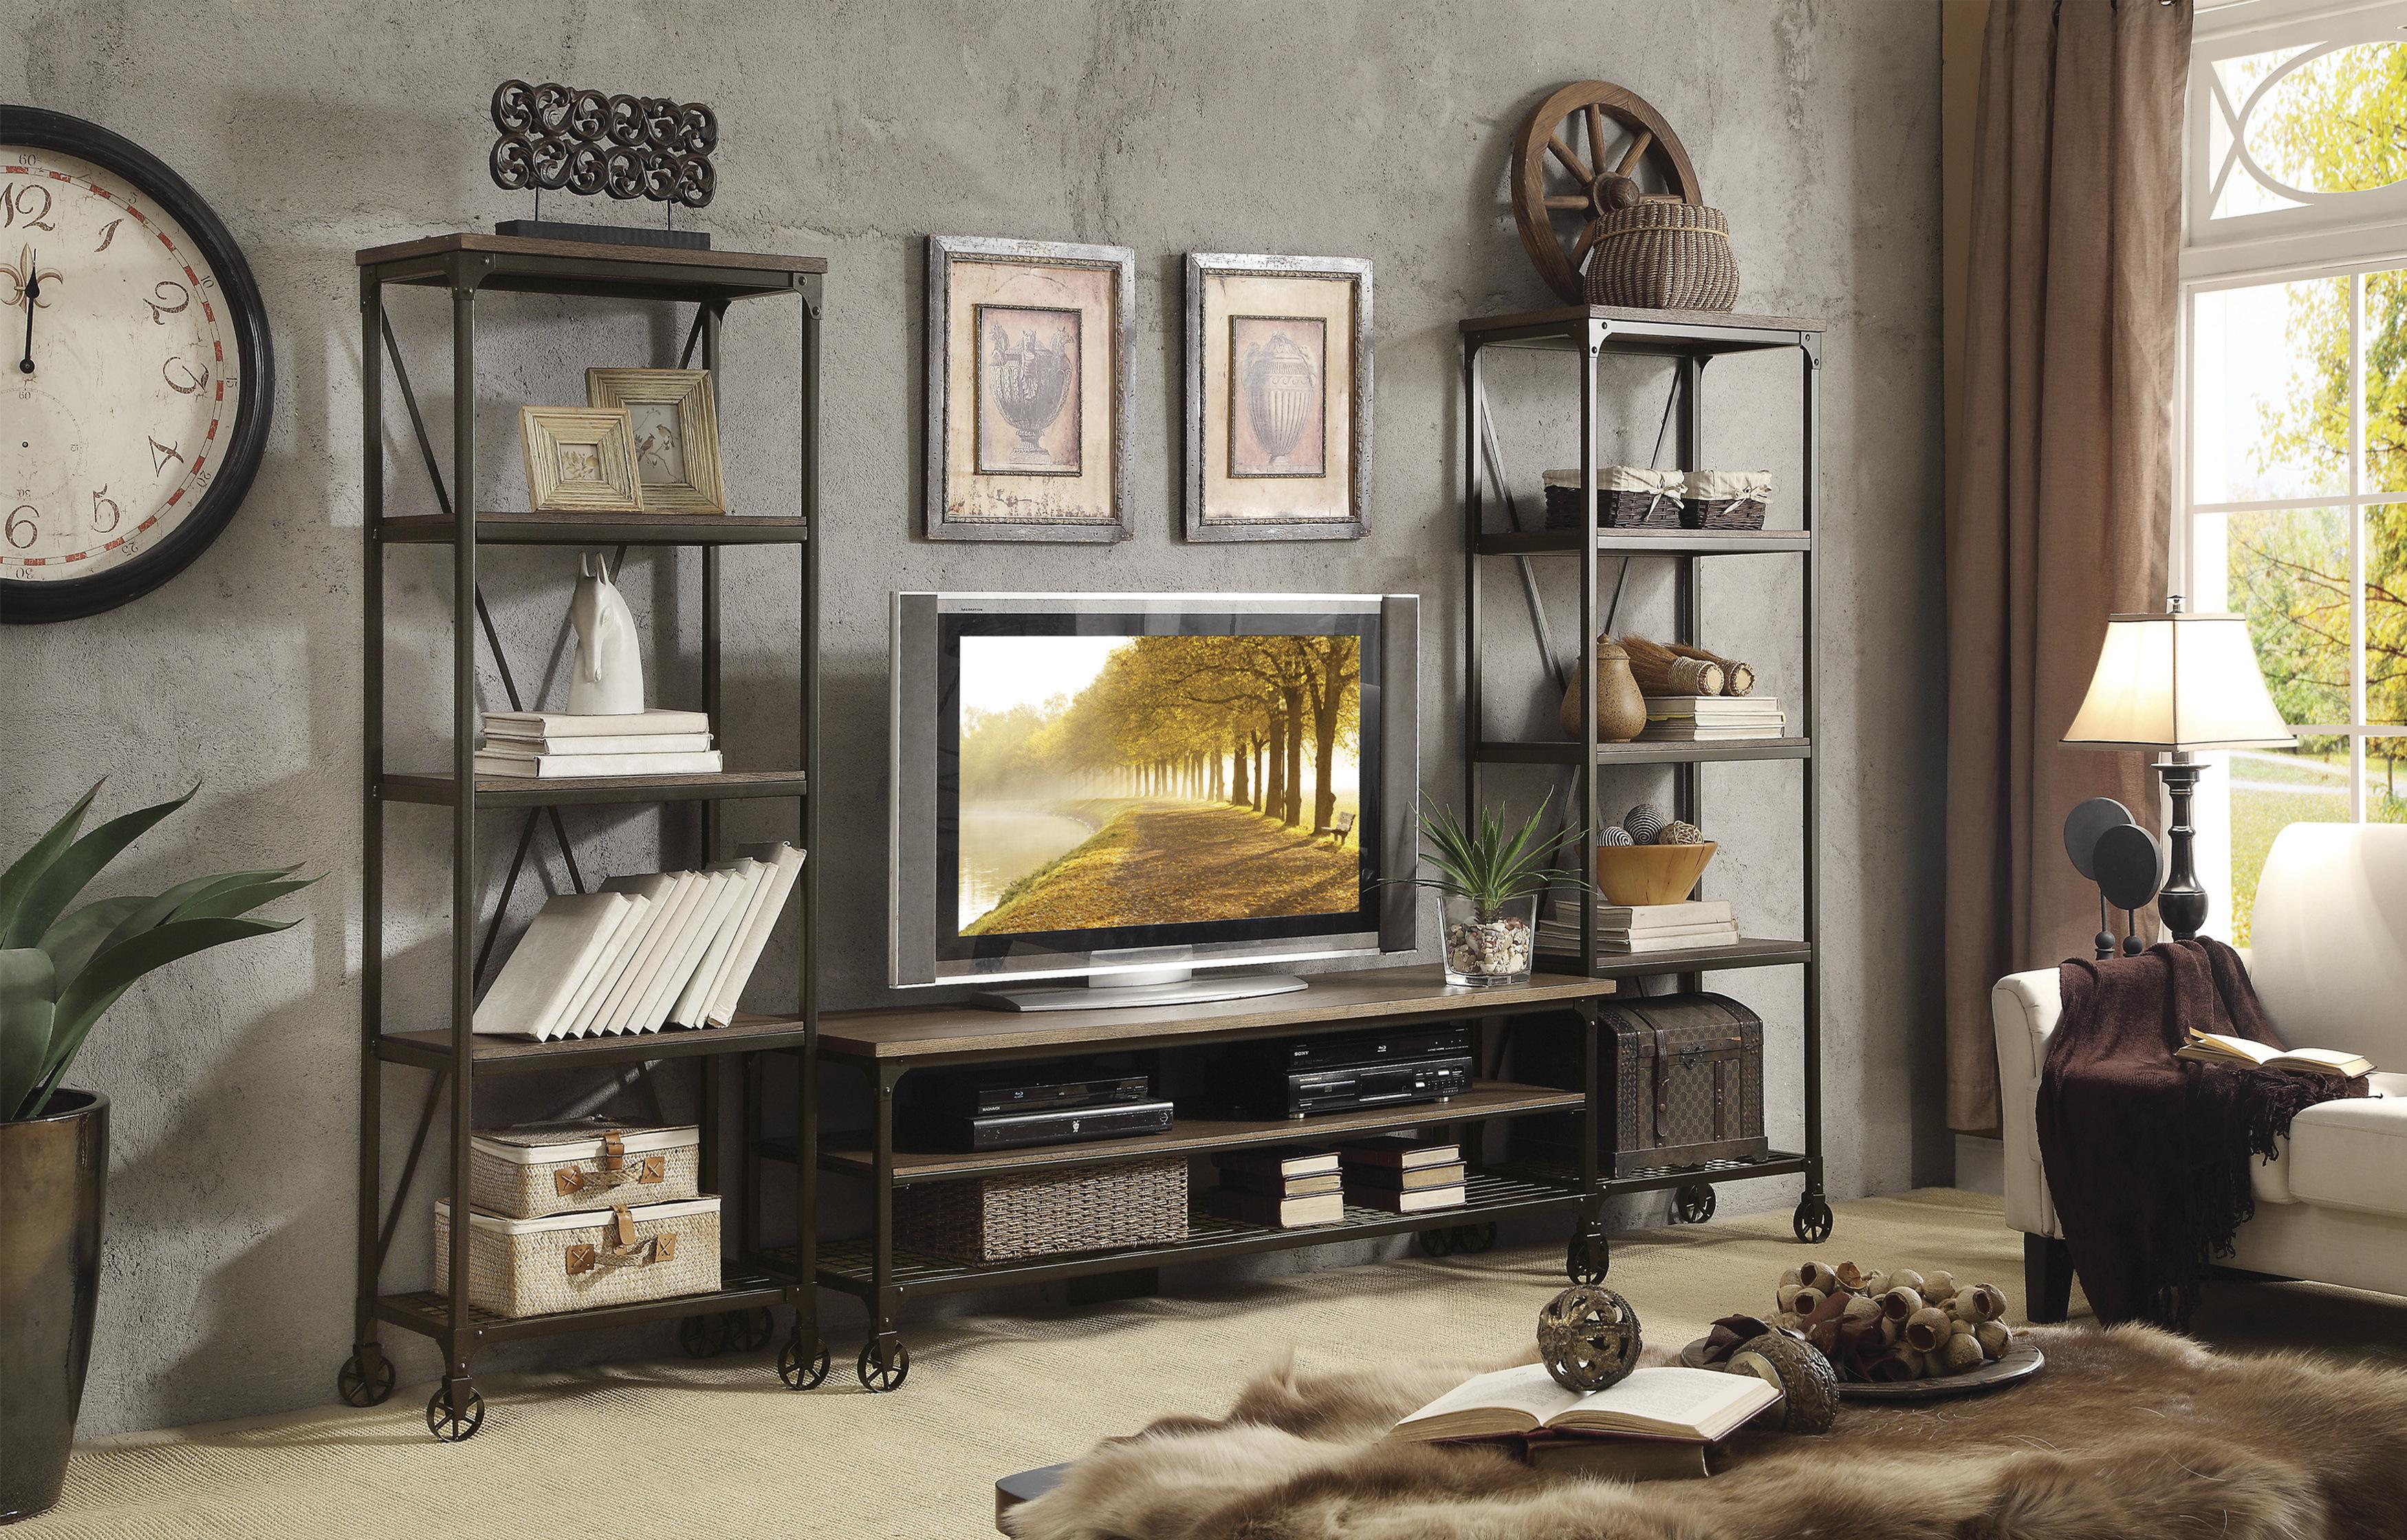 

    
5099-17 Transitional Weathered Natural Engineered Wood Bookcase Homelegance Millwood 5099-17
